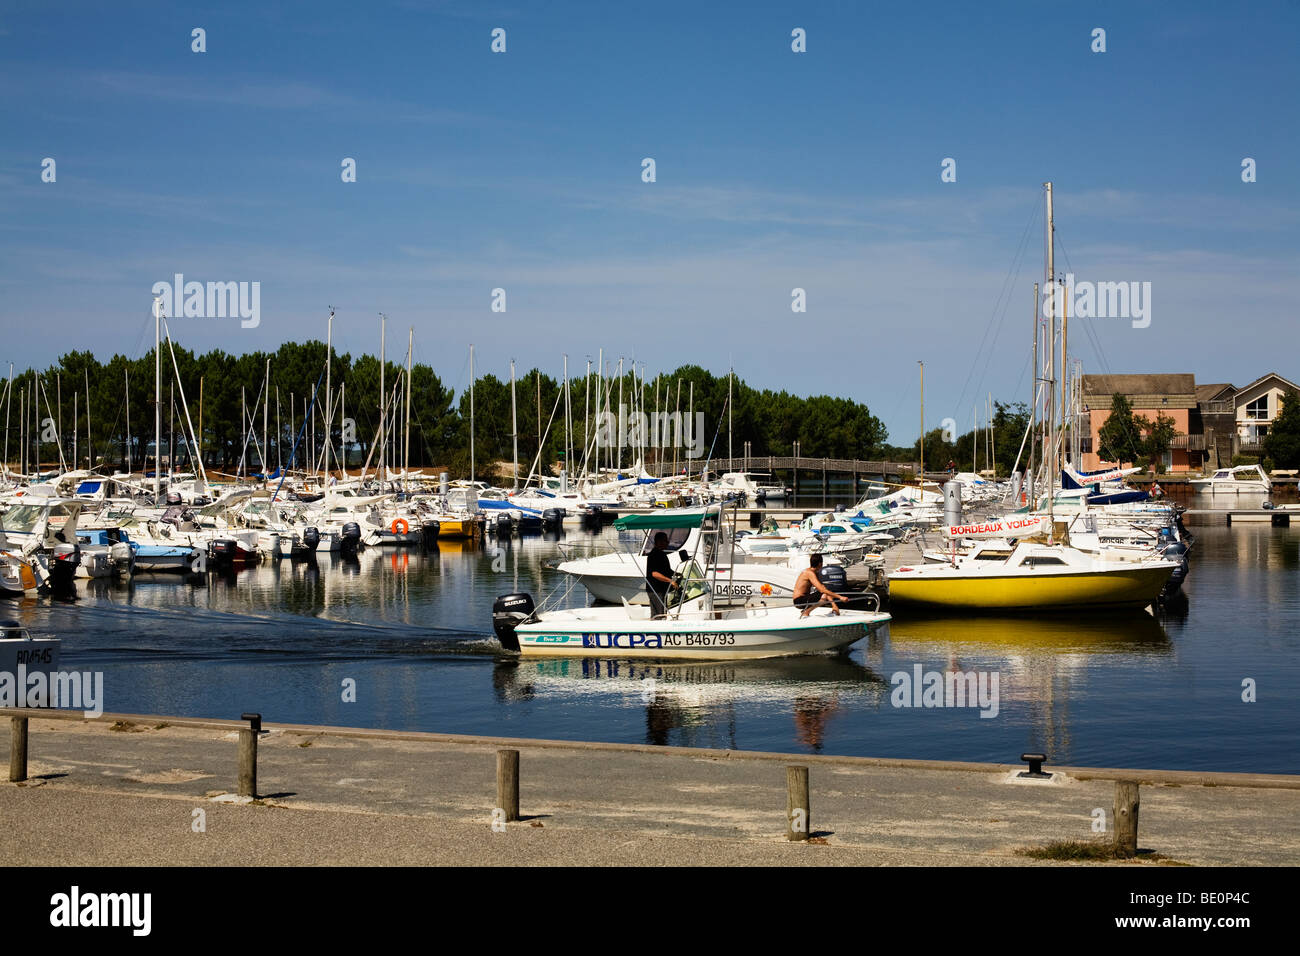 The Marina at Hourtin Port on Lac d'Hourtin in the Medoc Ocean region of Bordeaux in France Stock Photo